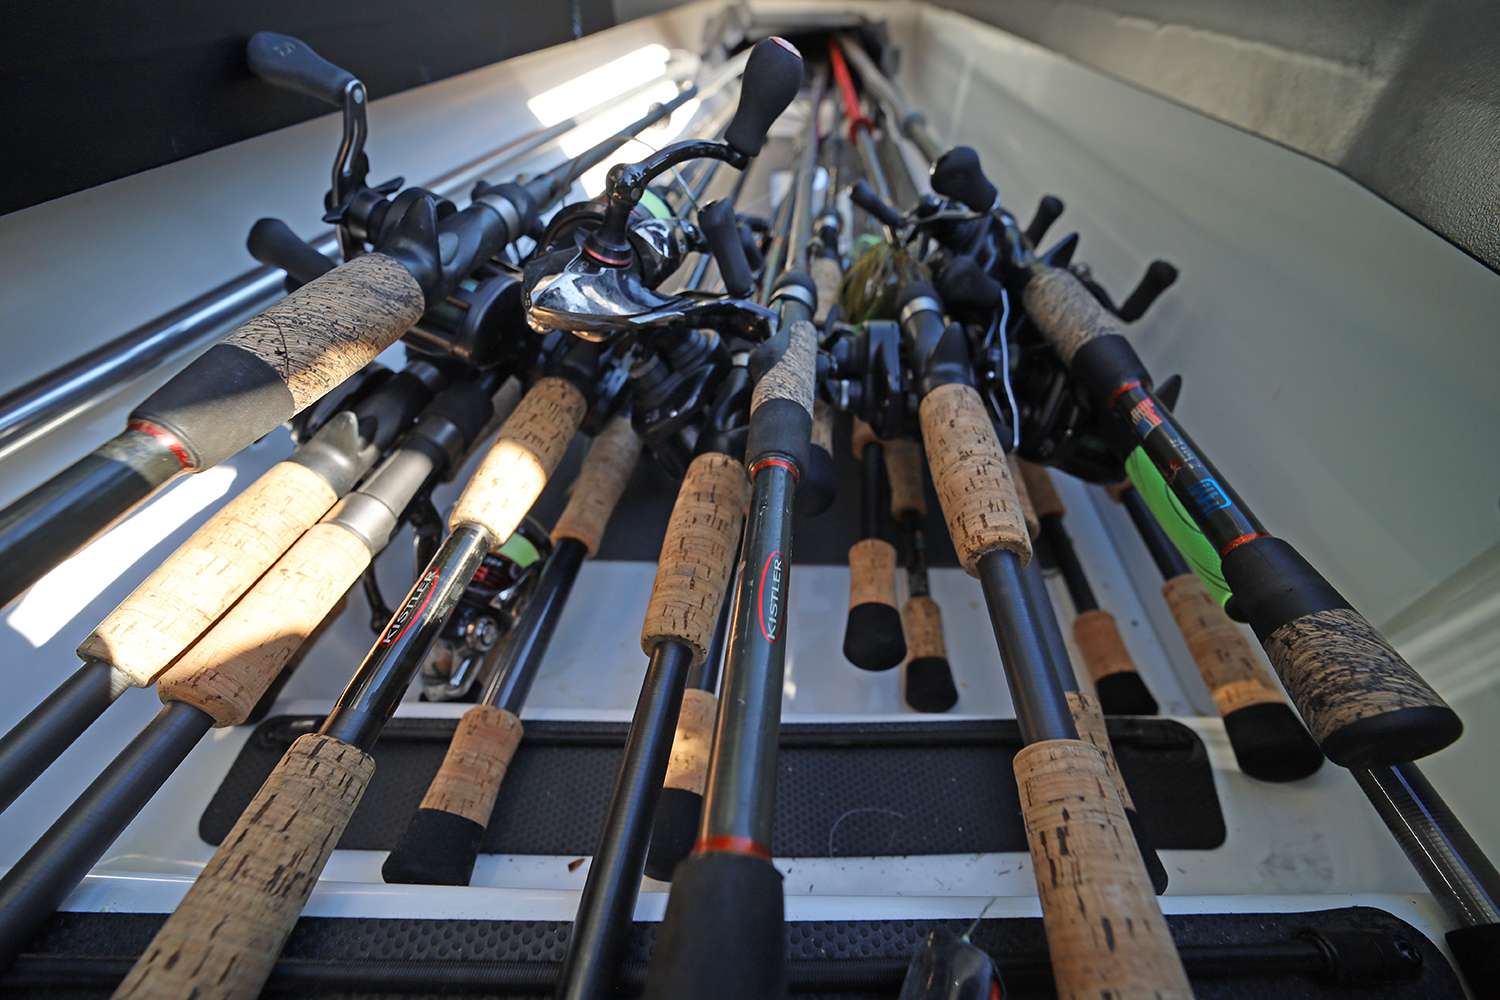 A stack of Kistler rods.